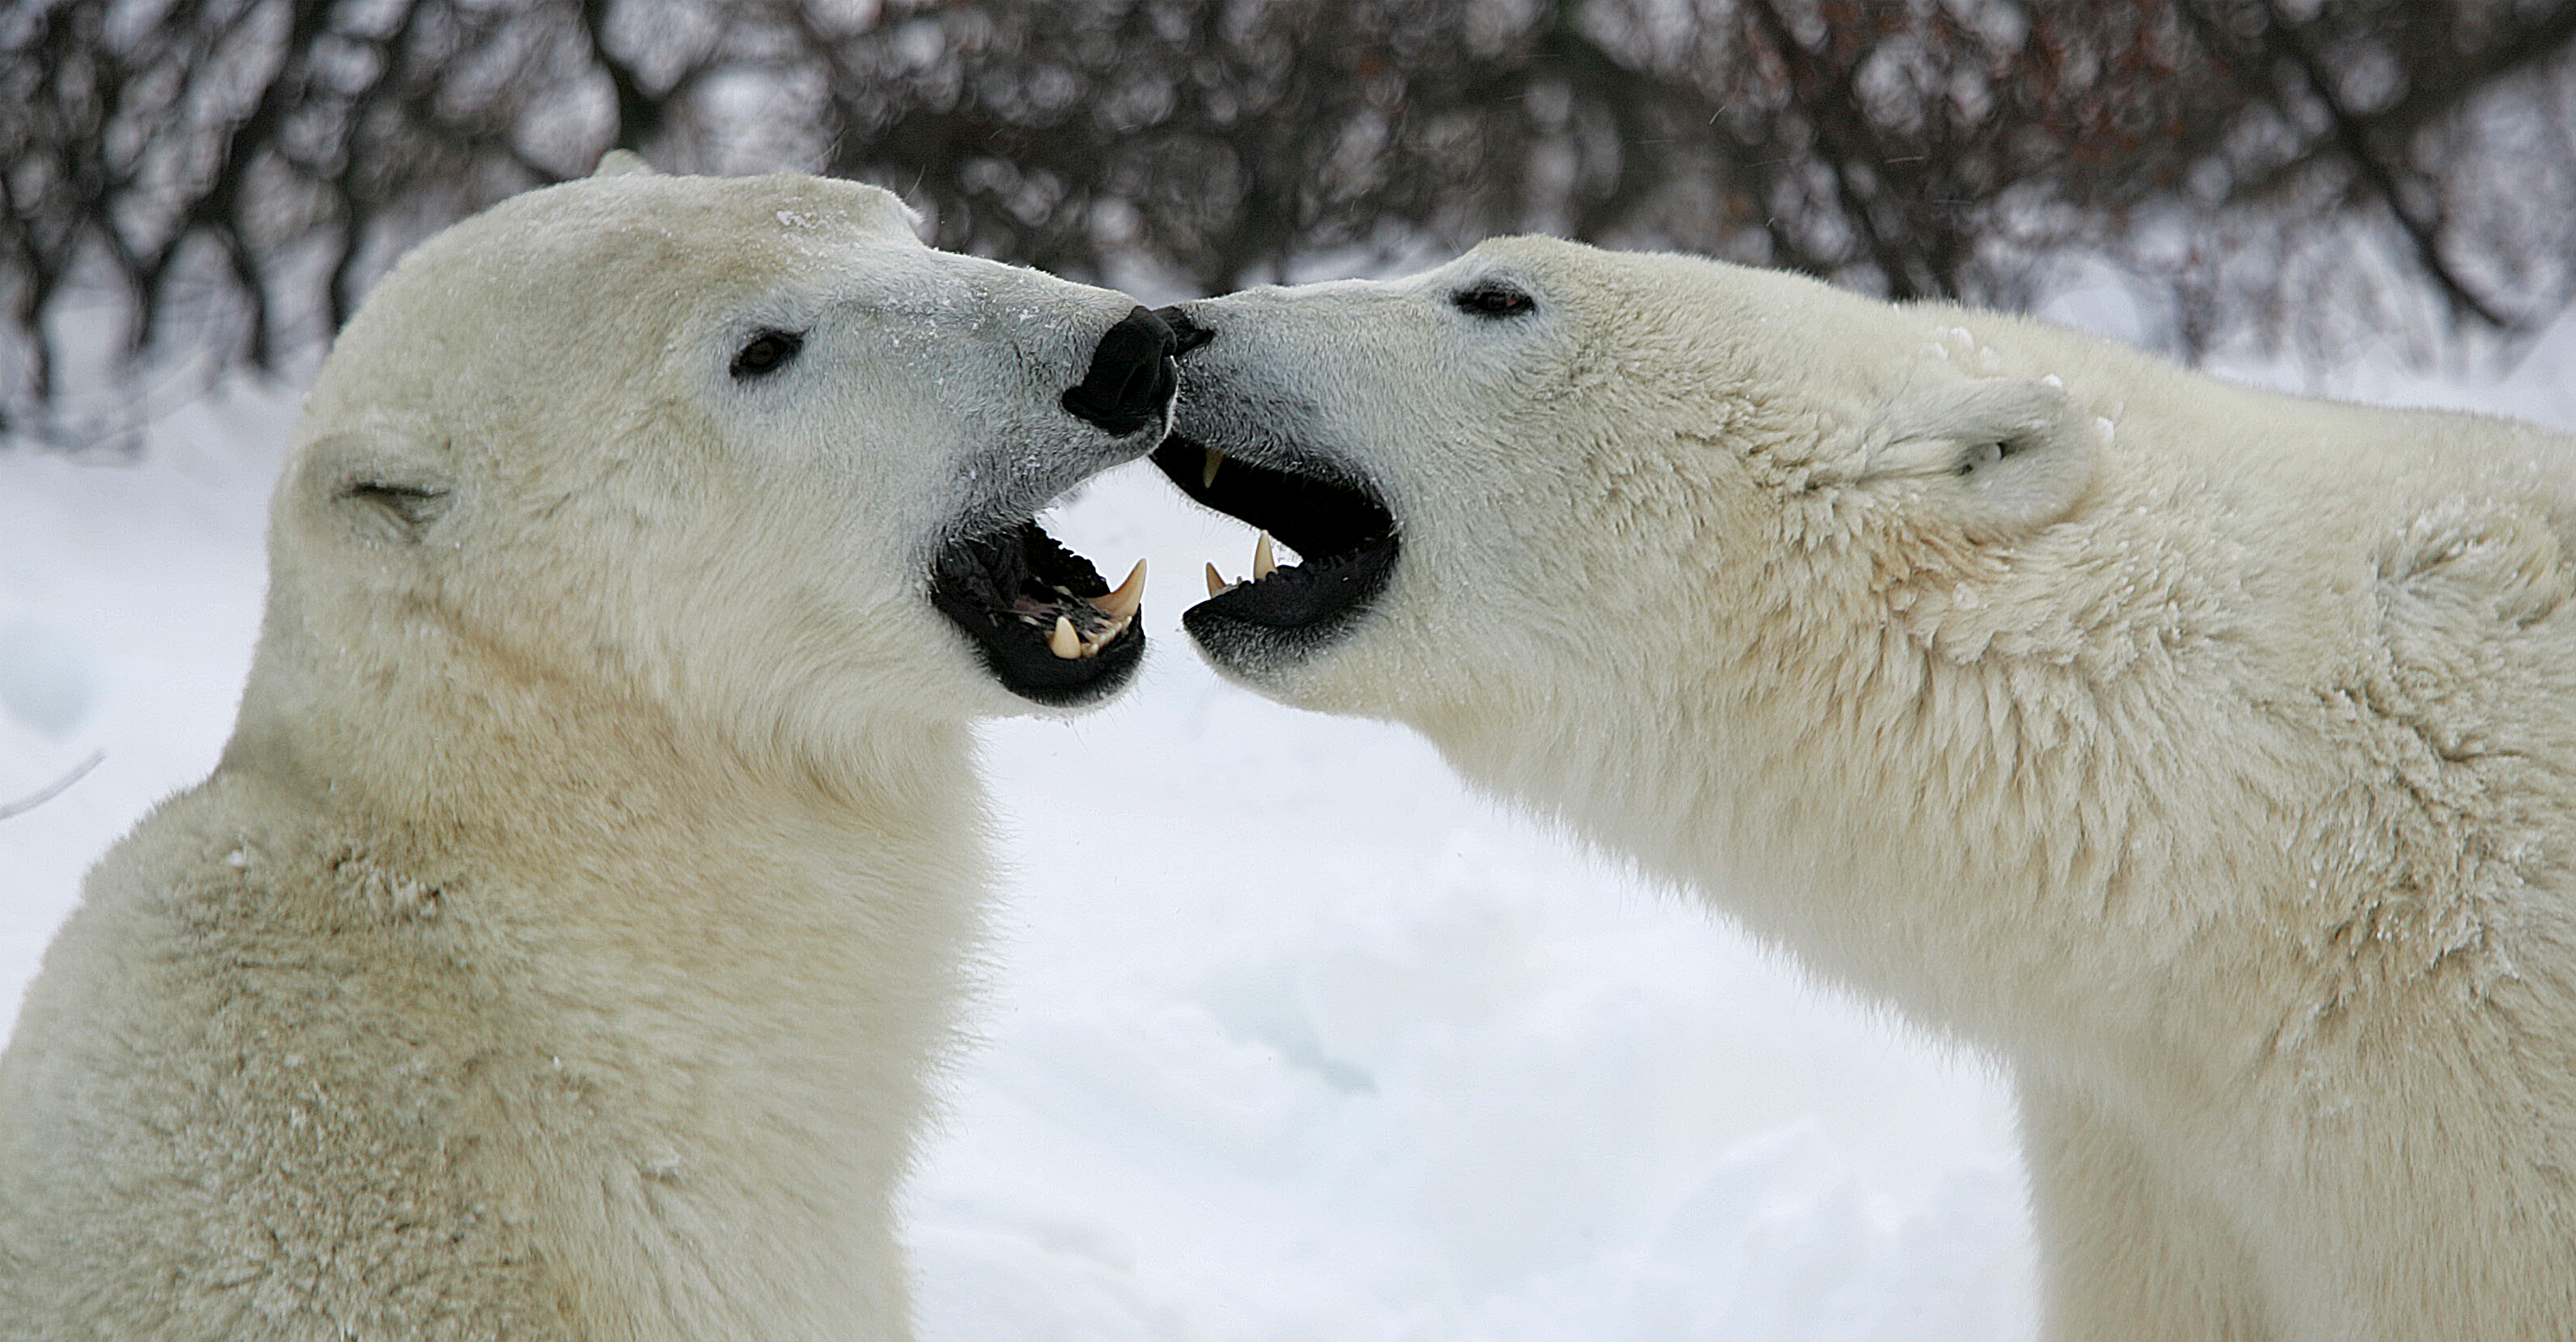 A close-up of two polar bears sparring on the tundra, Churchill, Manitoba, Canada